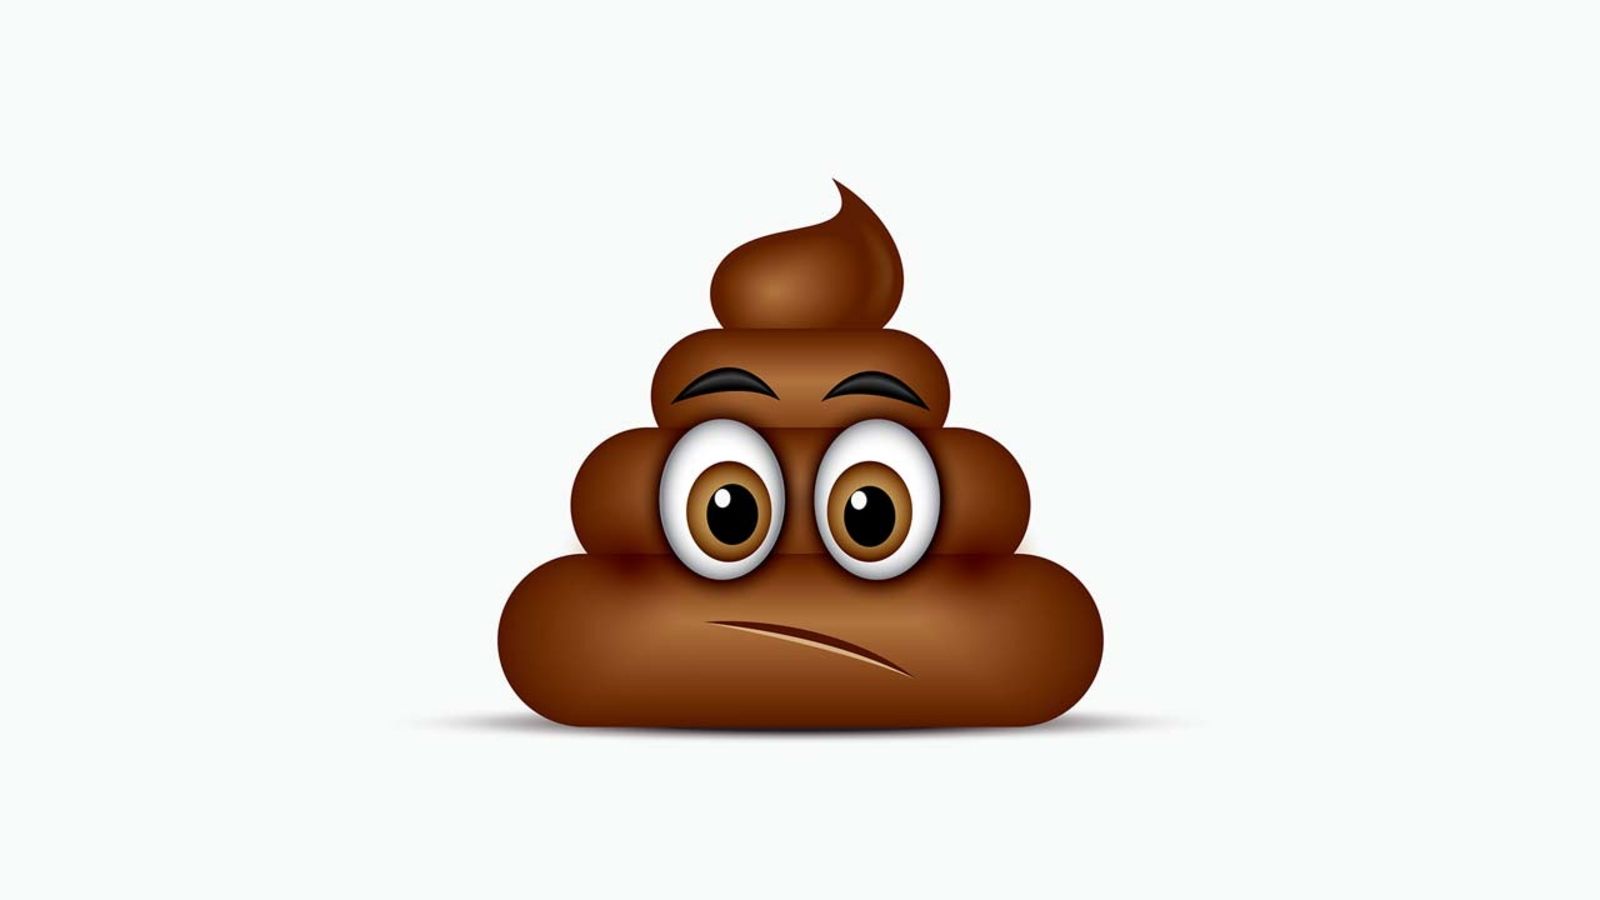 Will we get a sad poop emoji? Well, there's a process